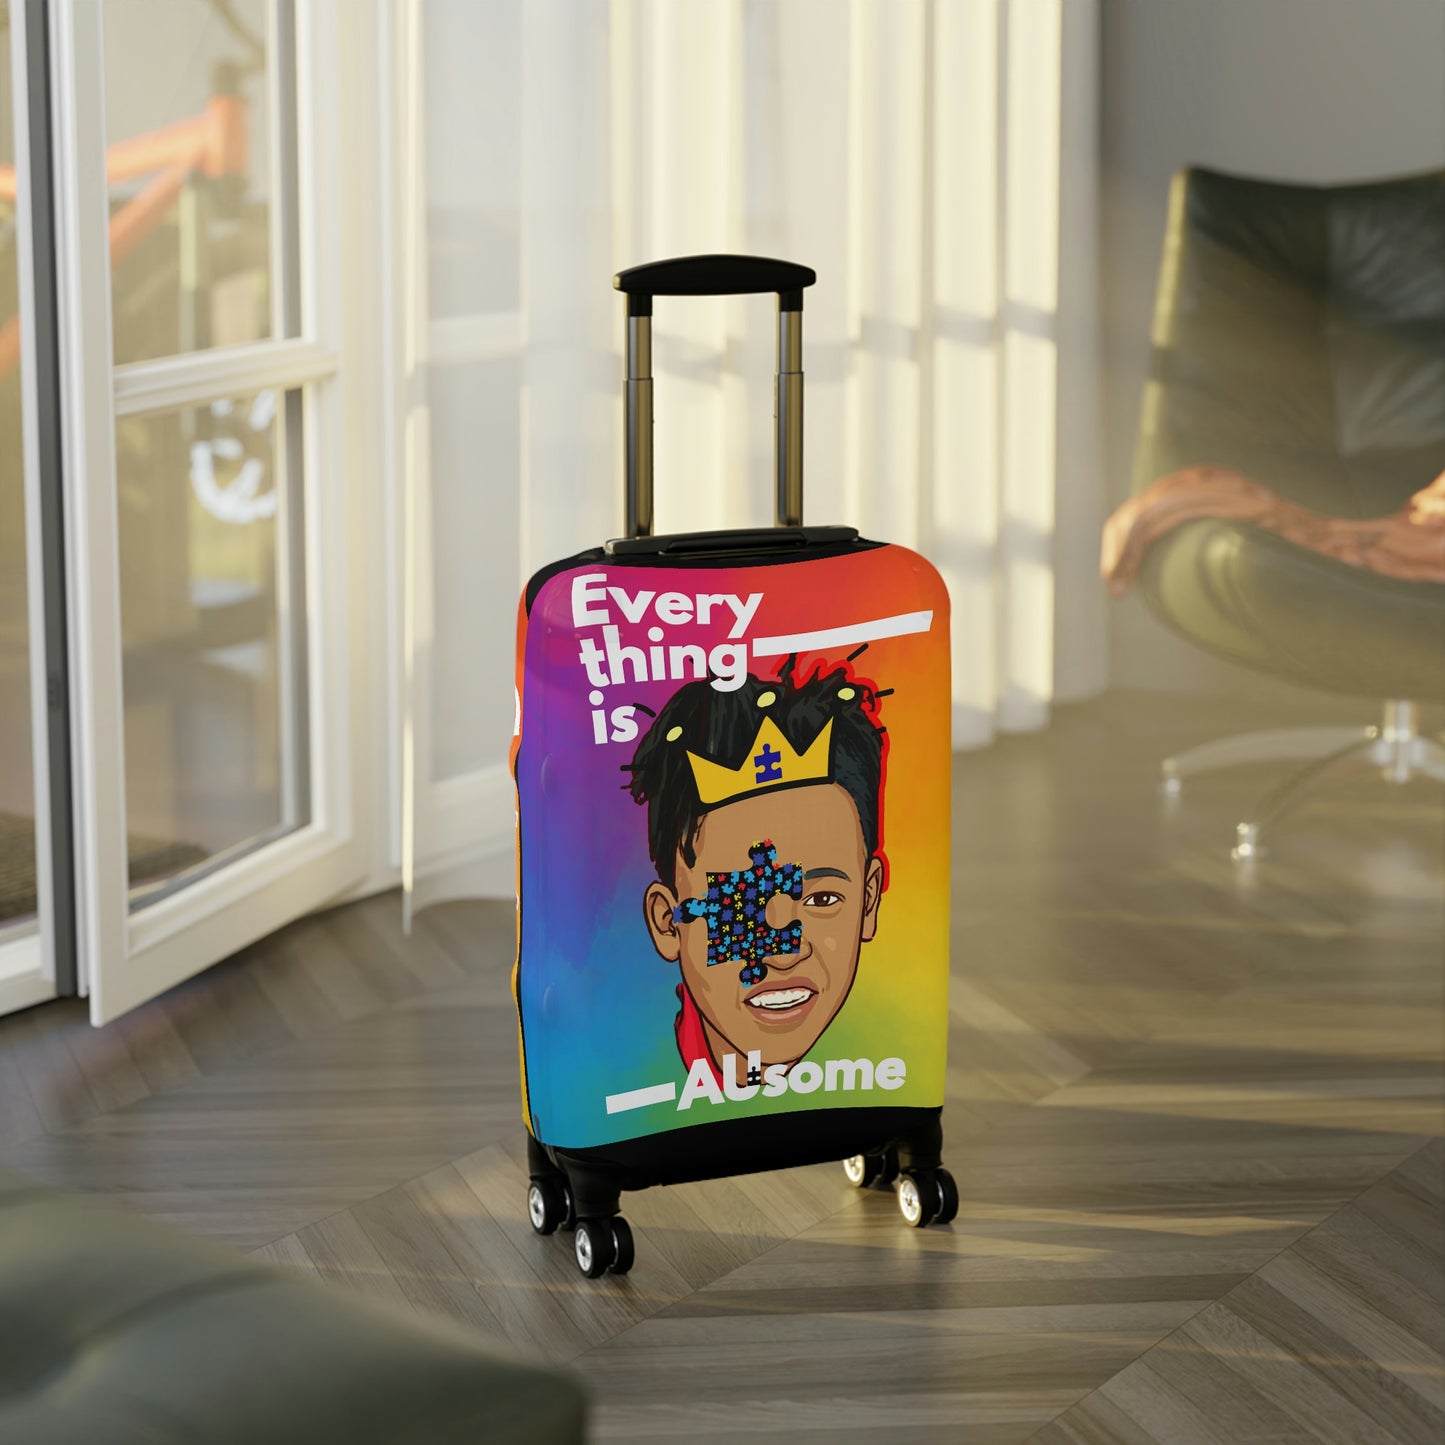 TRAVEL WITH ME Luggage Cover